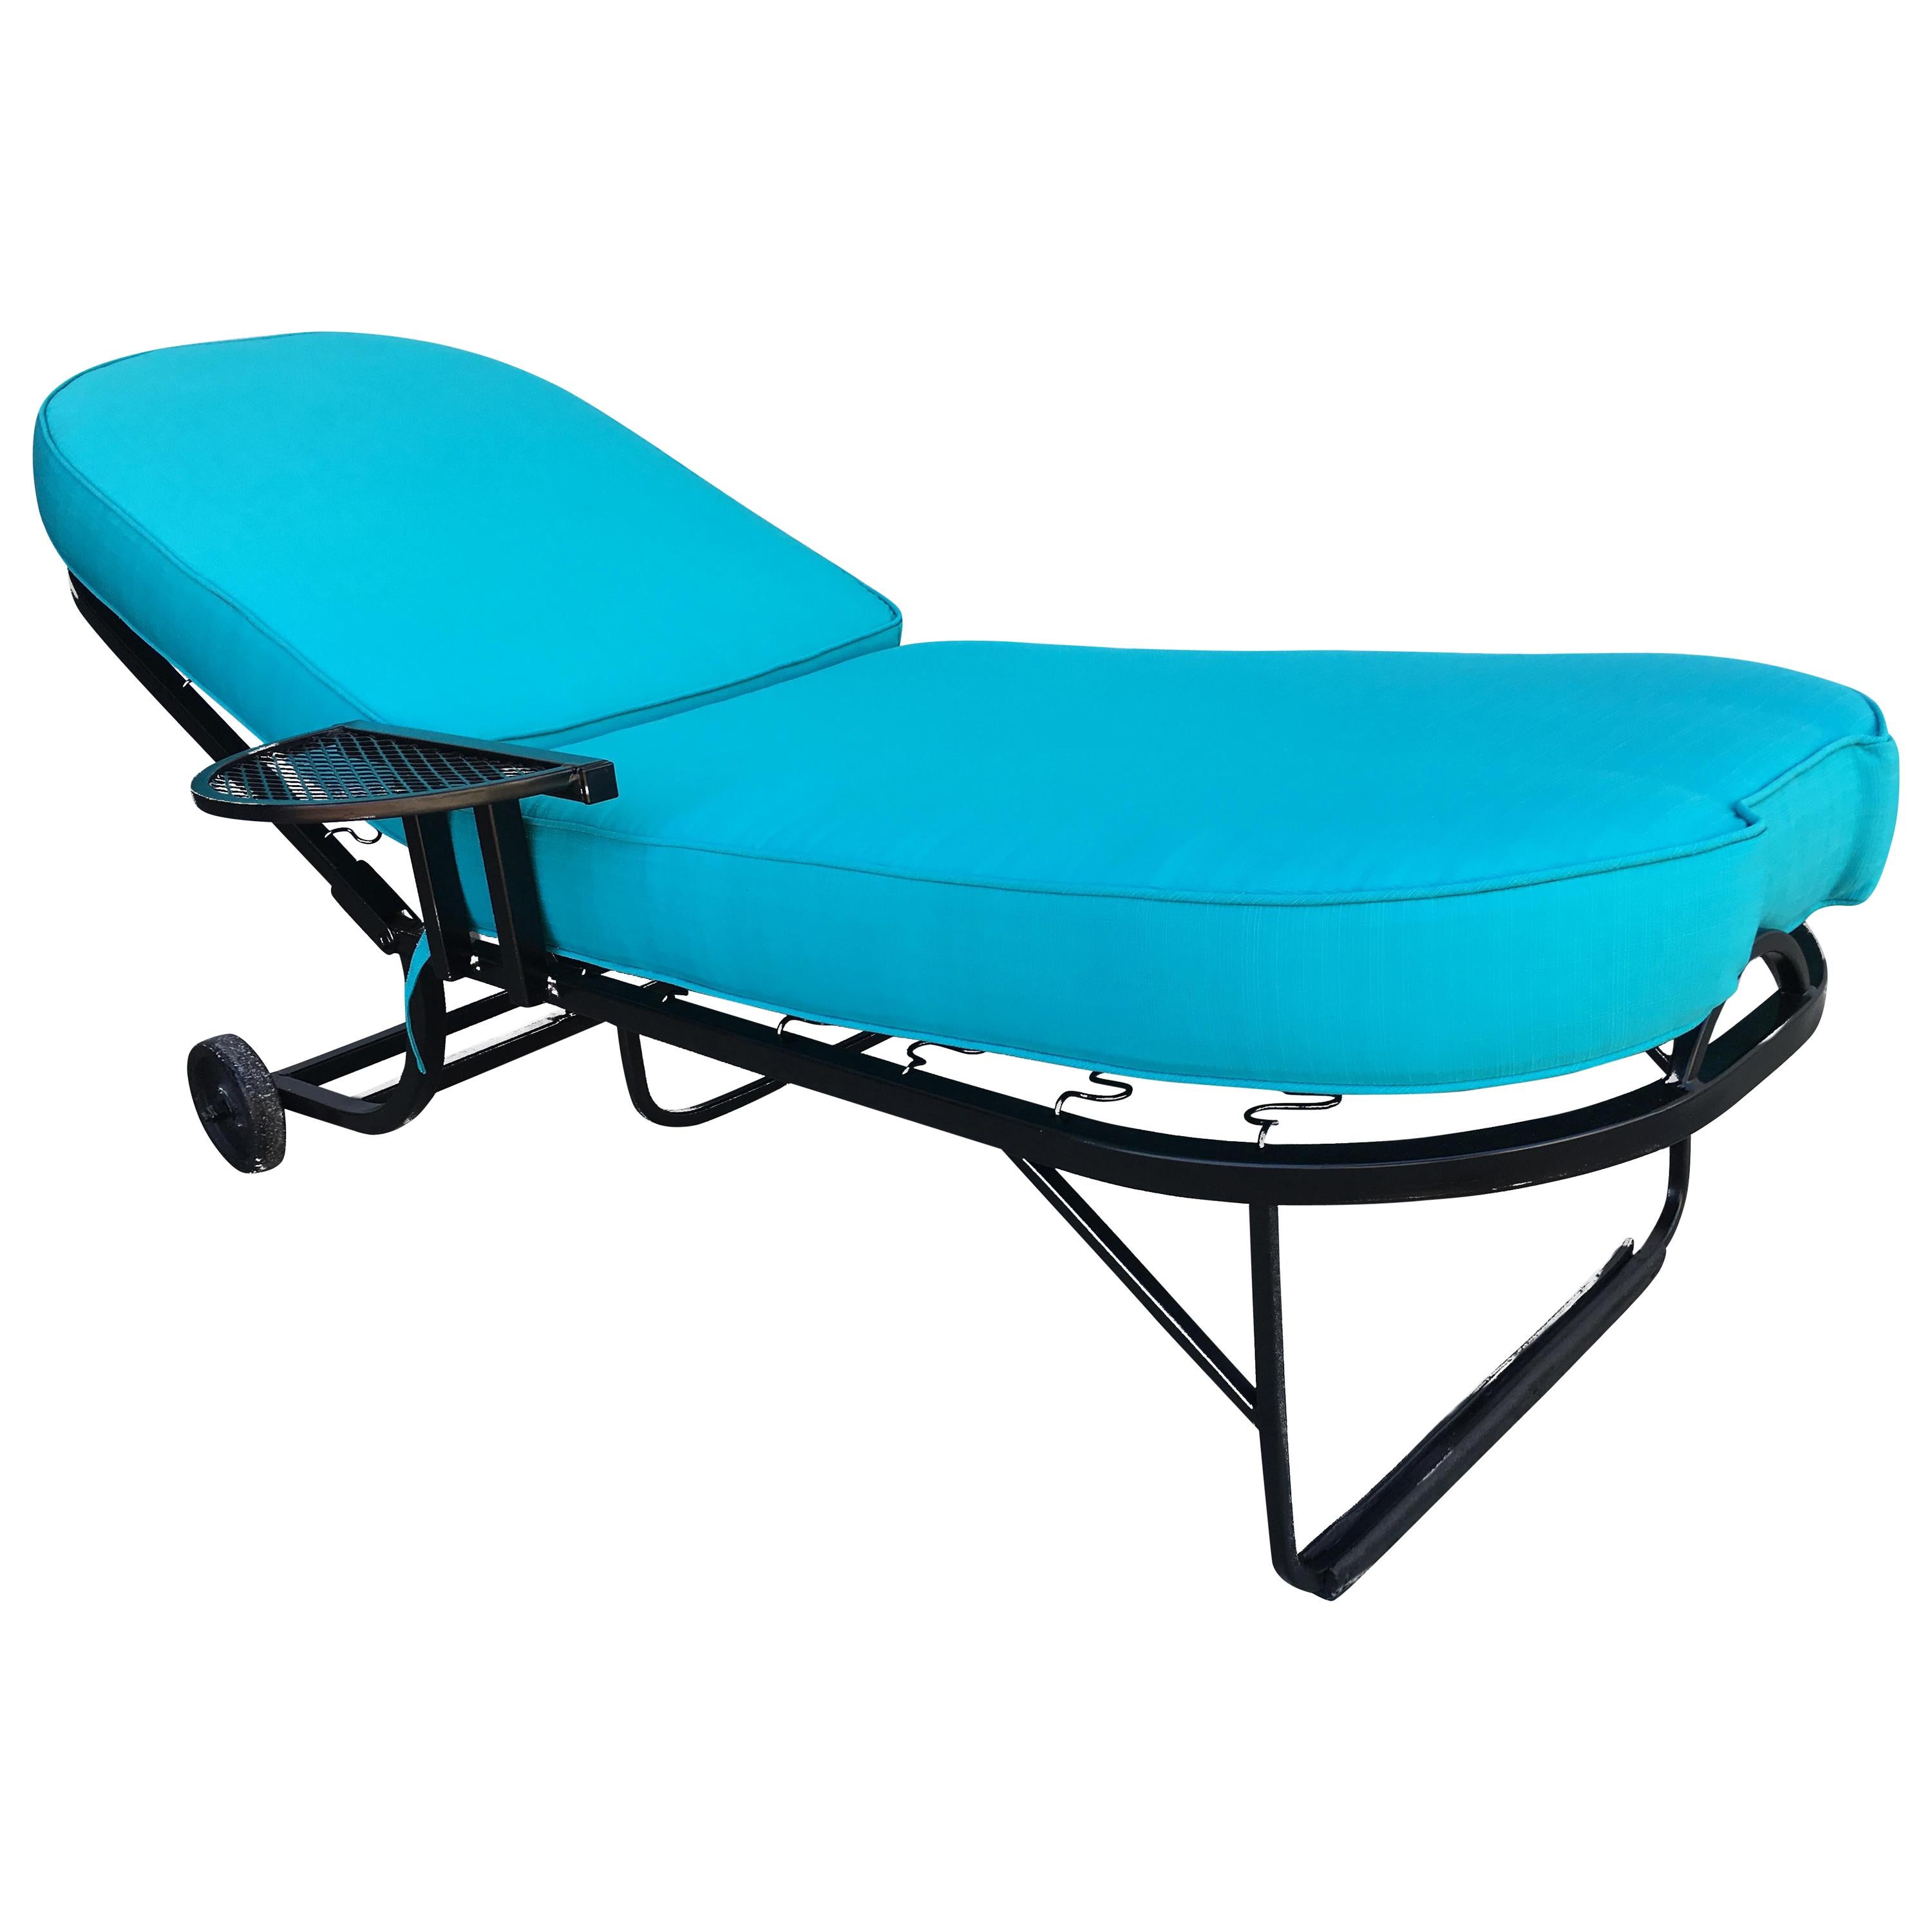 Black Steel Spring Outdoor / Patio Chaise Lounge by Woodard, 3- available